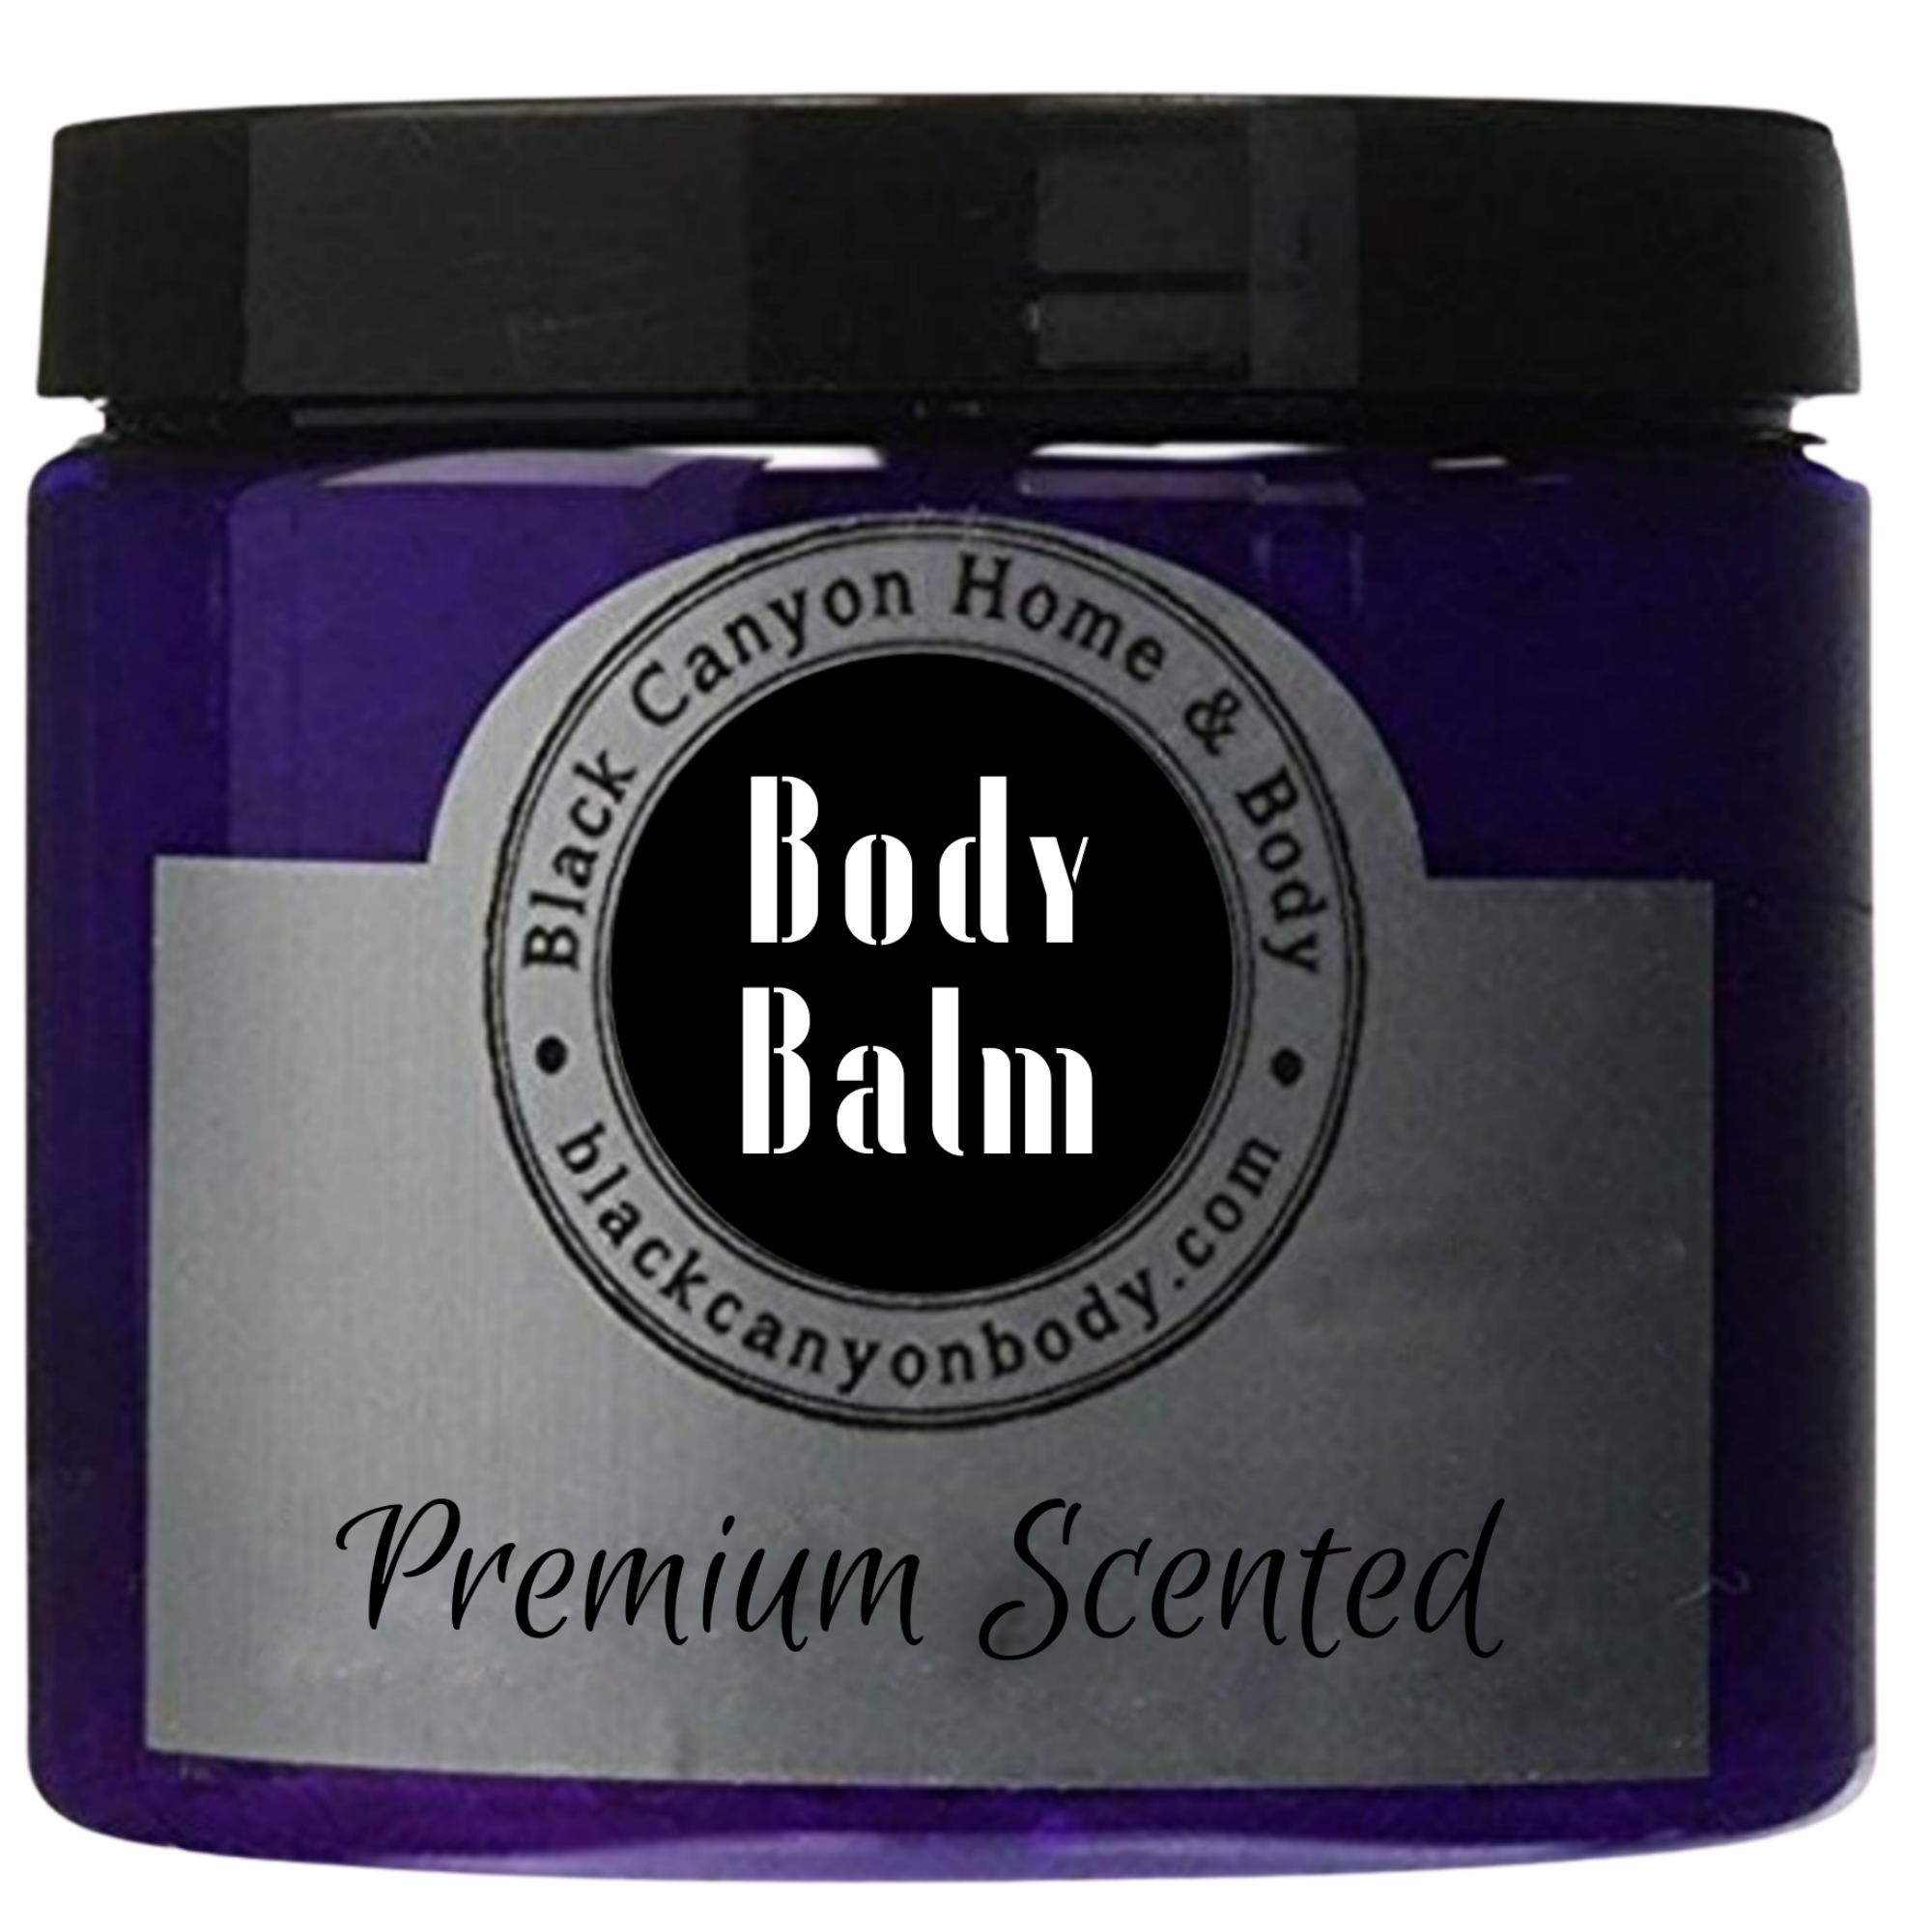 Black Canyon Lilac Bloom Scented Natural Body Balm with Shea